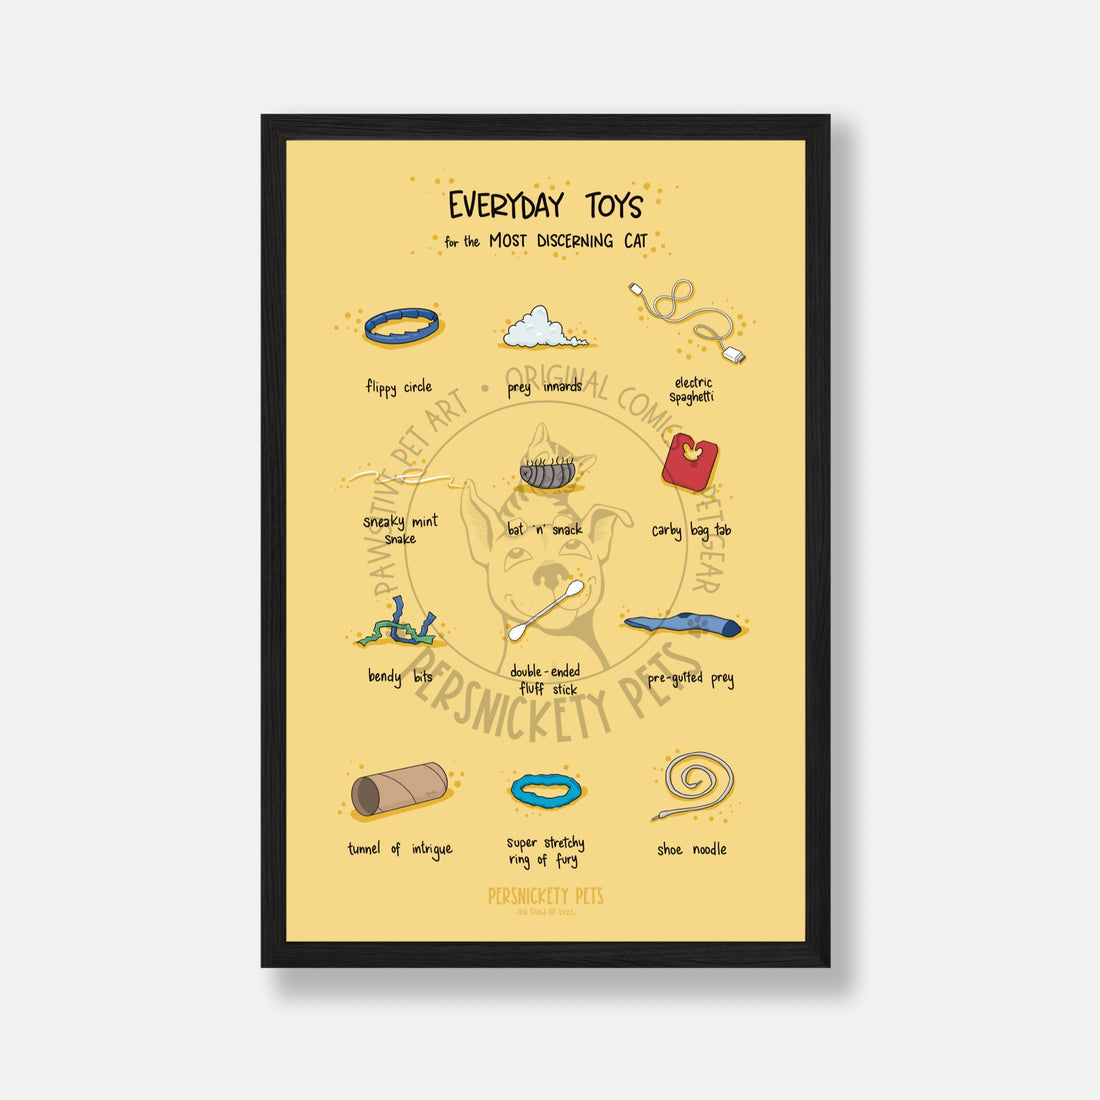 Persnickety Pets: Everyday cat toys art print, poster, 11x17 in black frame